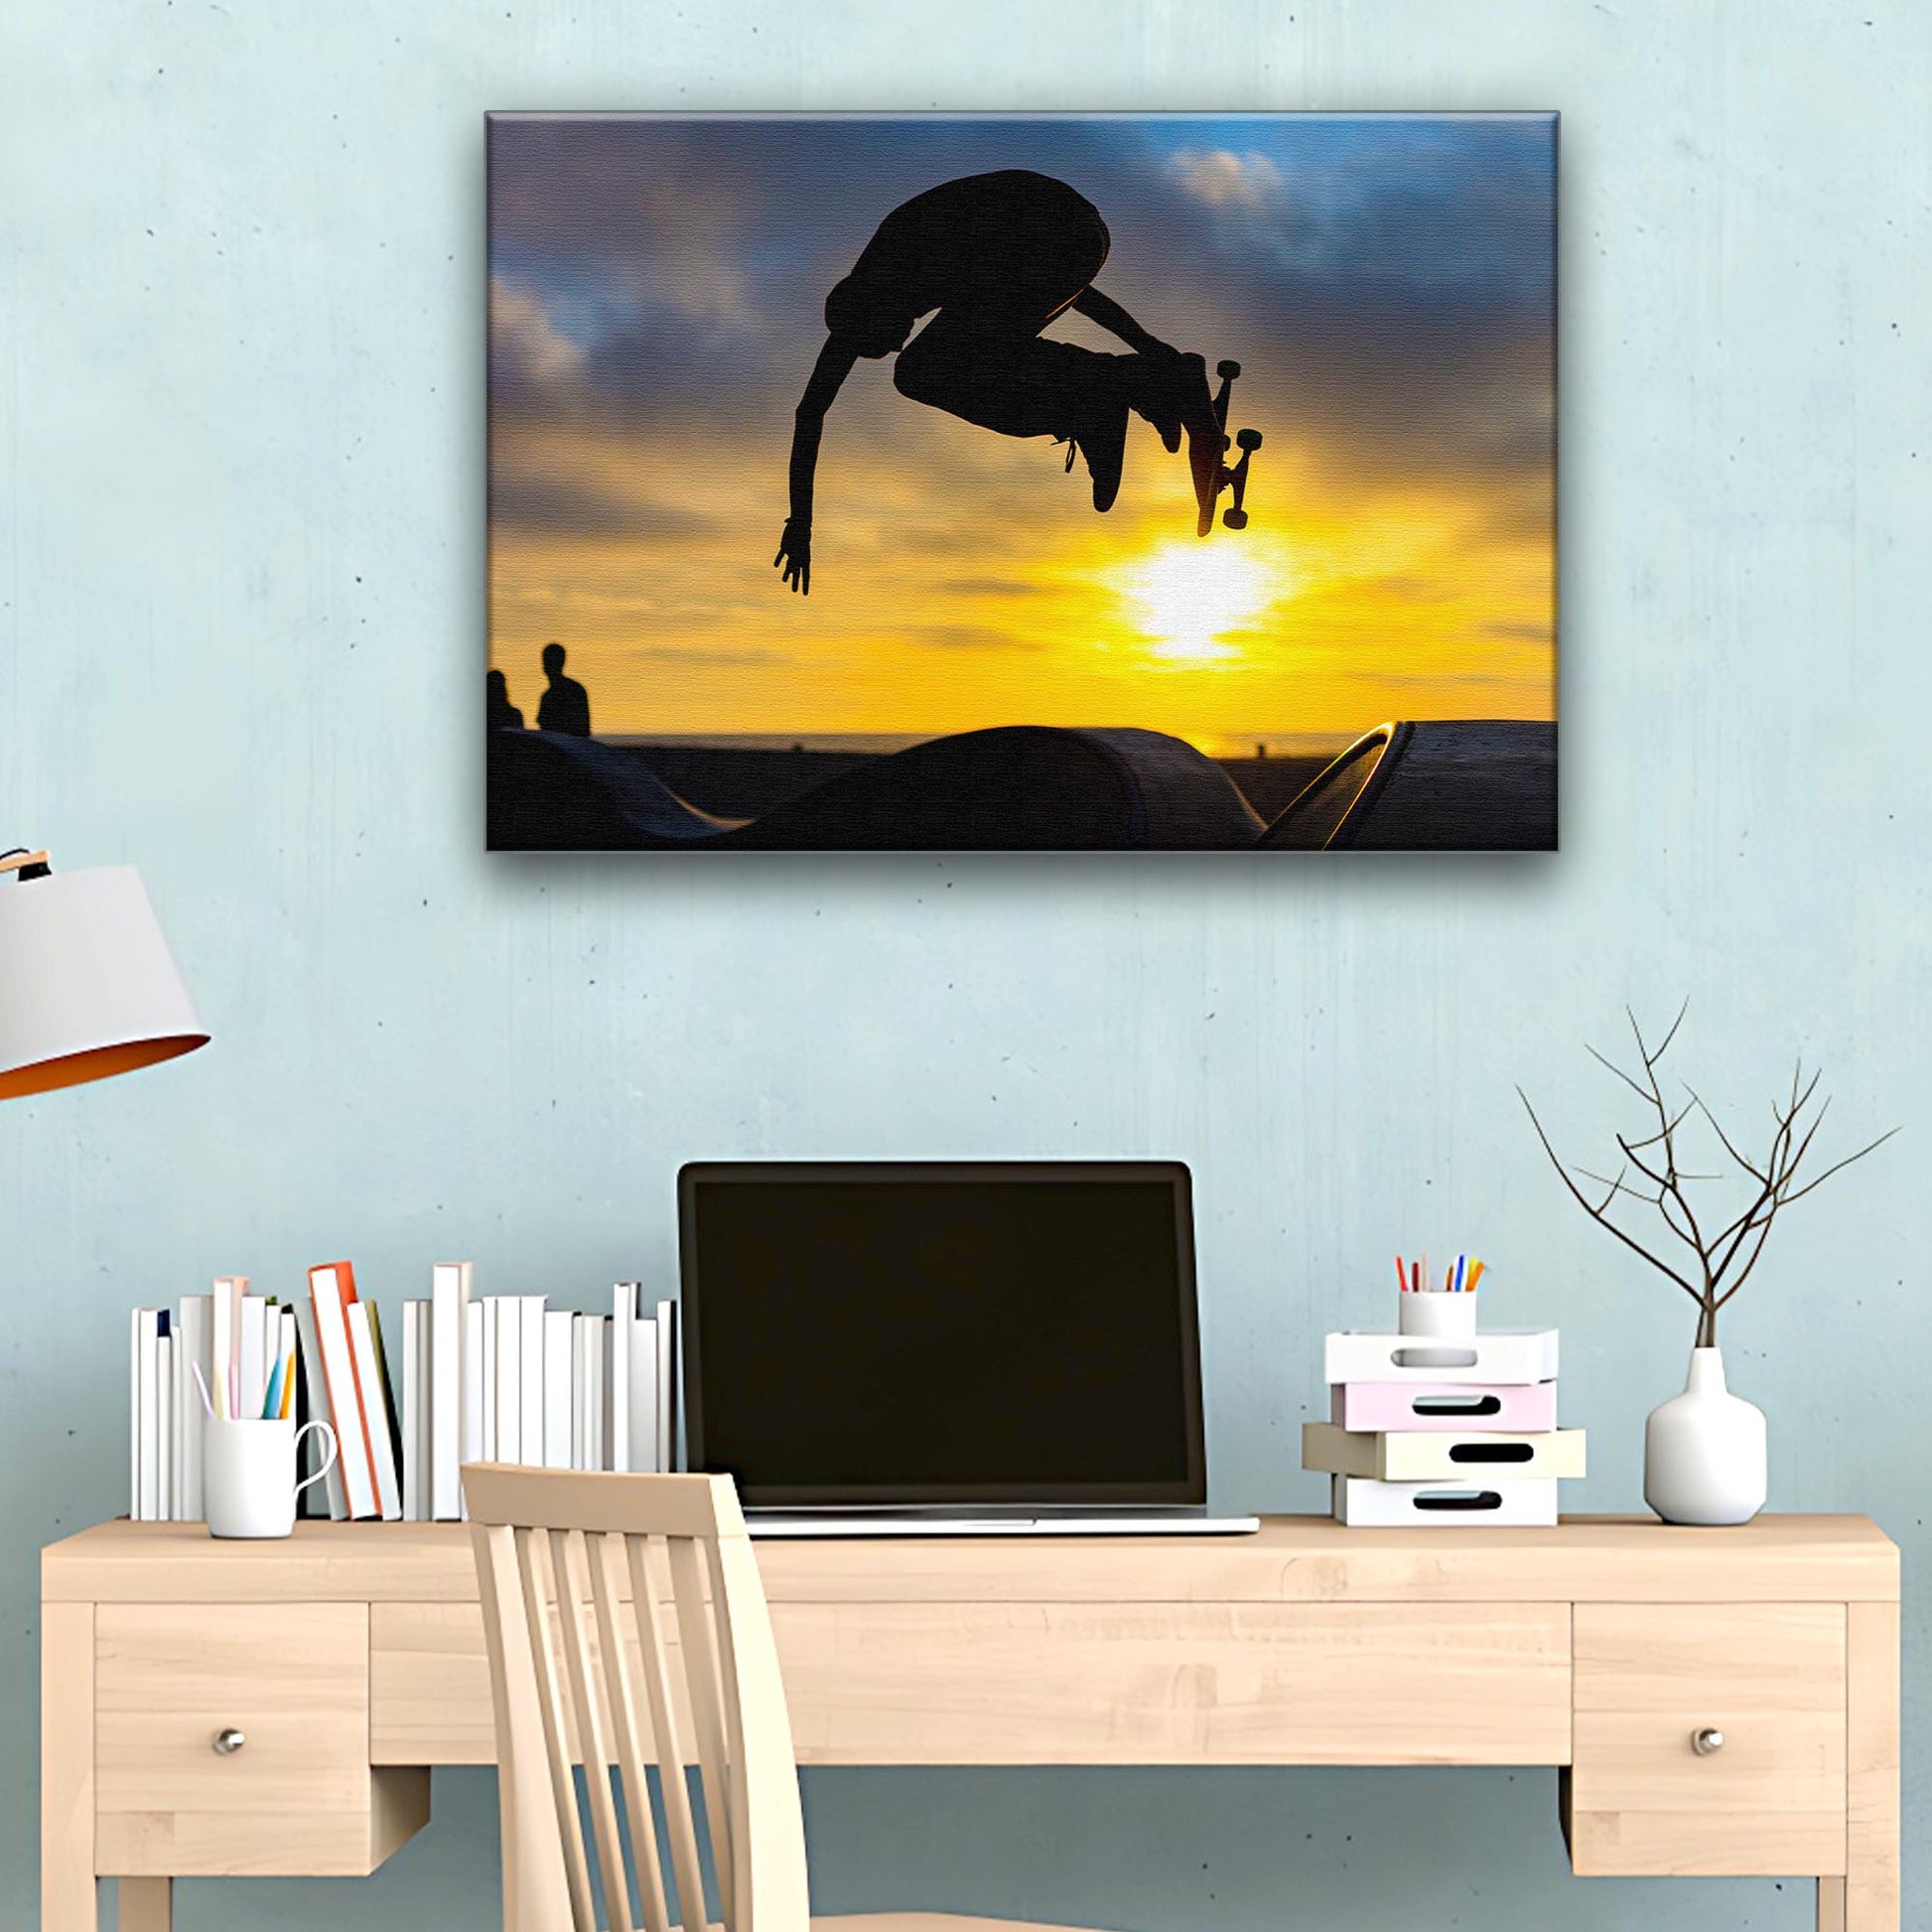 Skateboard Ramp Canvas Wall Art  - Image by Tailored Canvases